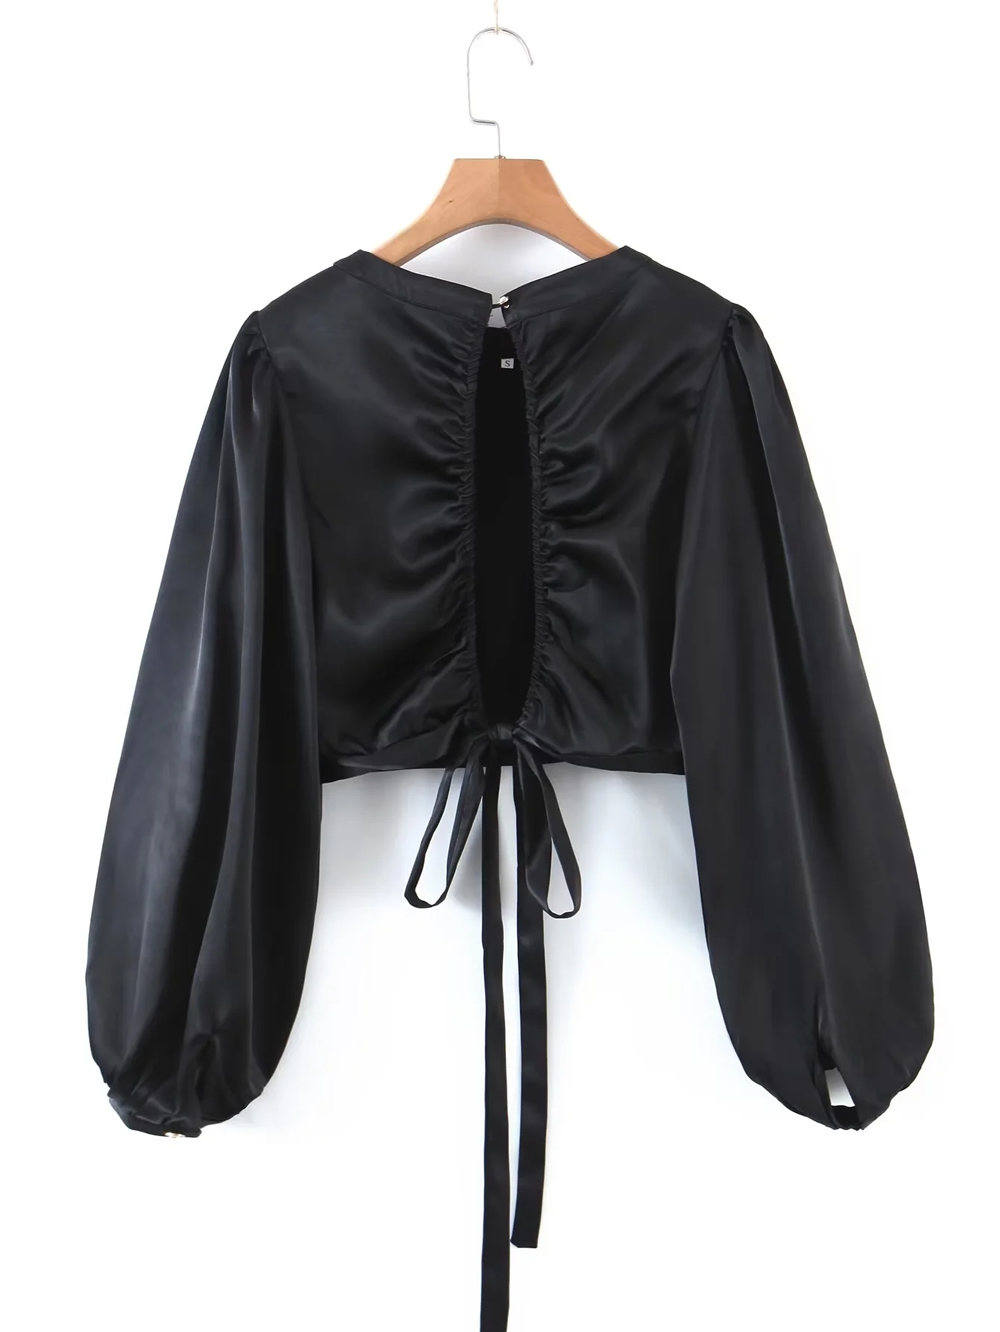 Fashion Black Satin Puff Sleeve Lace-up Top,Sweater